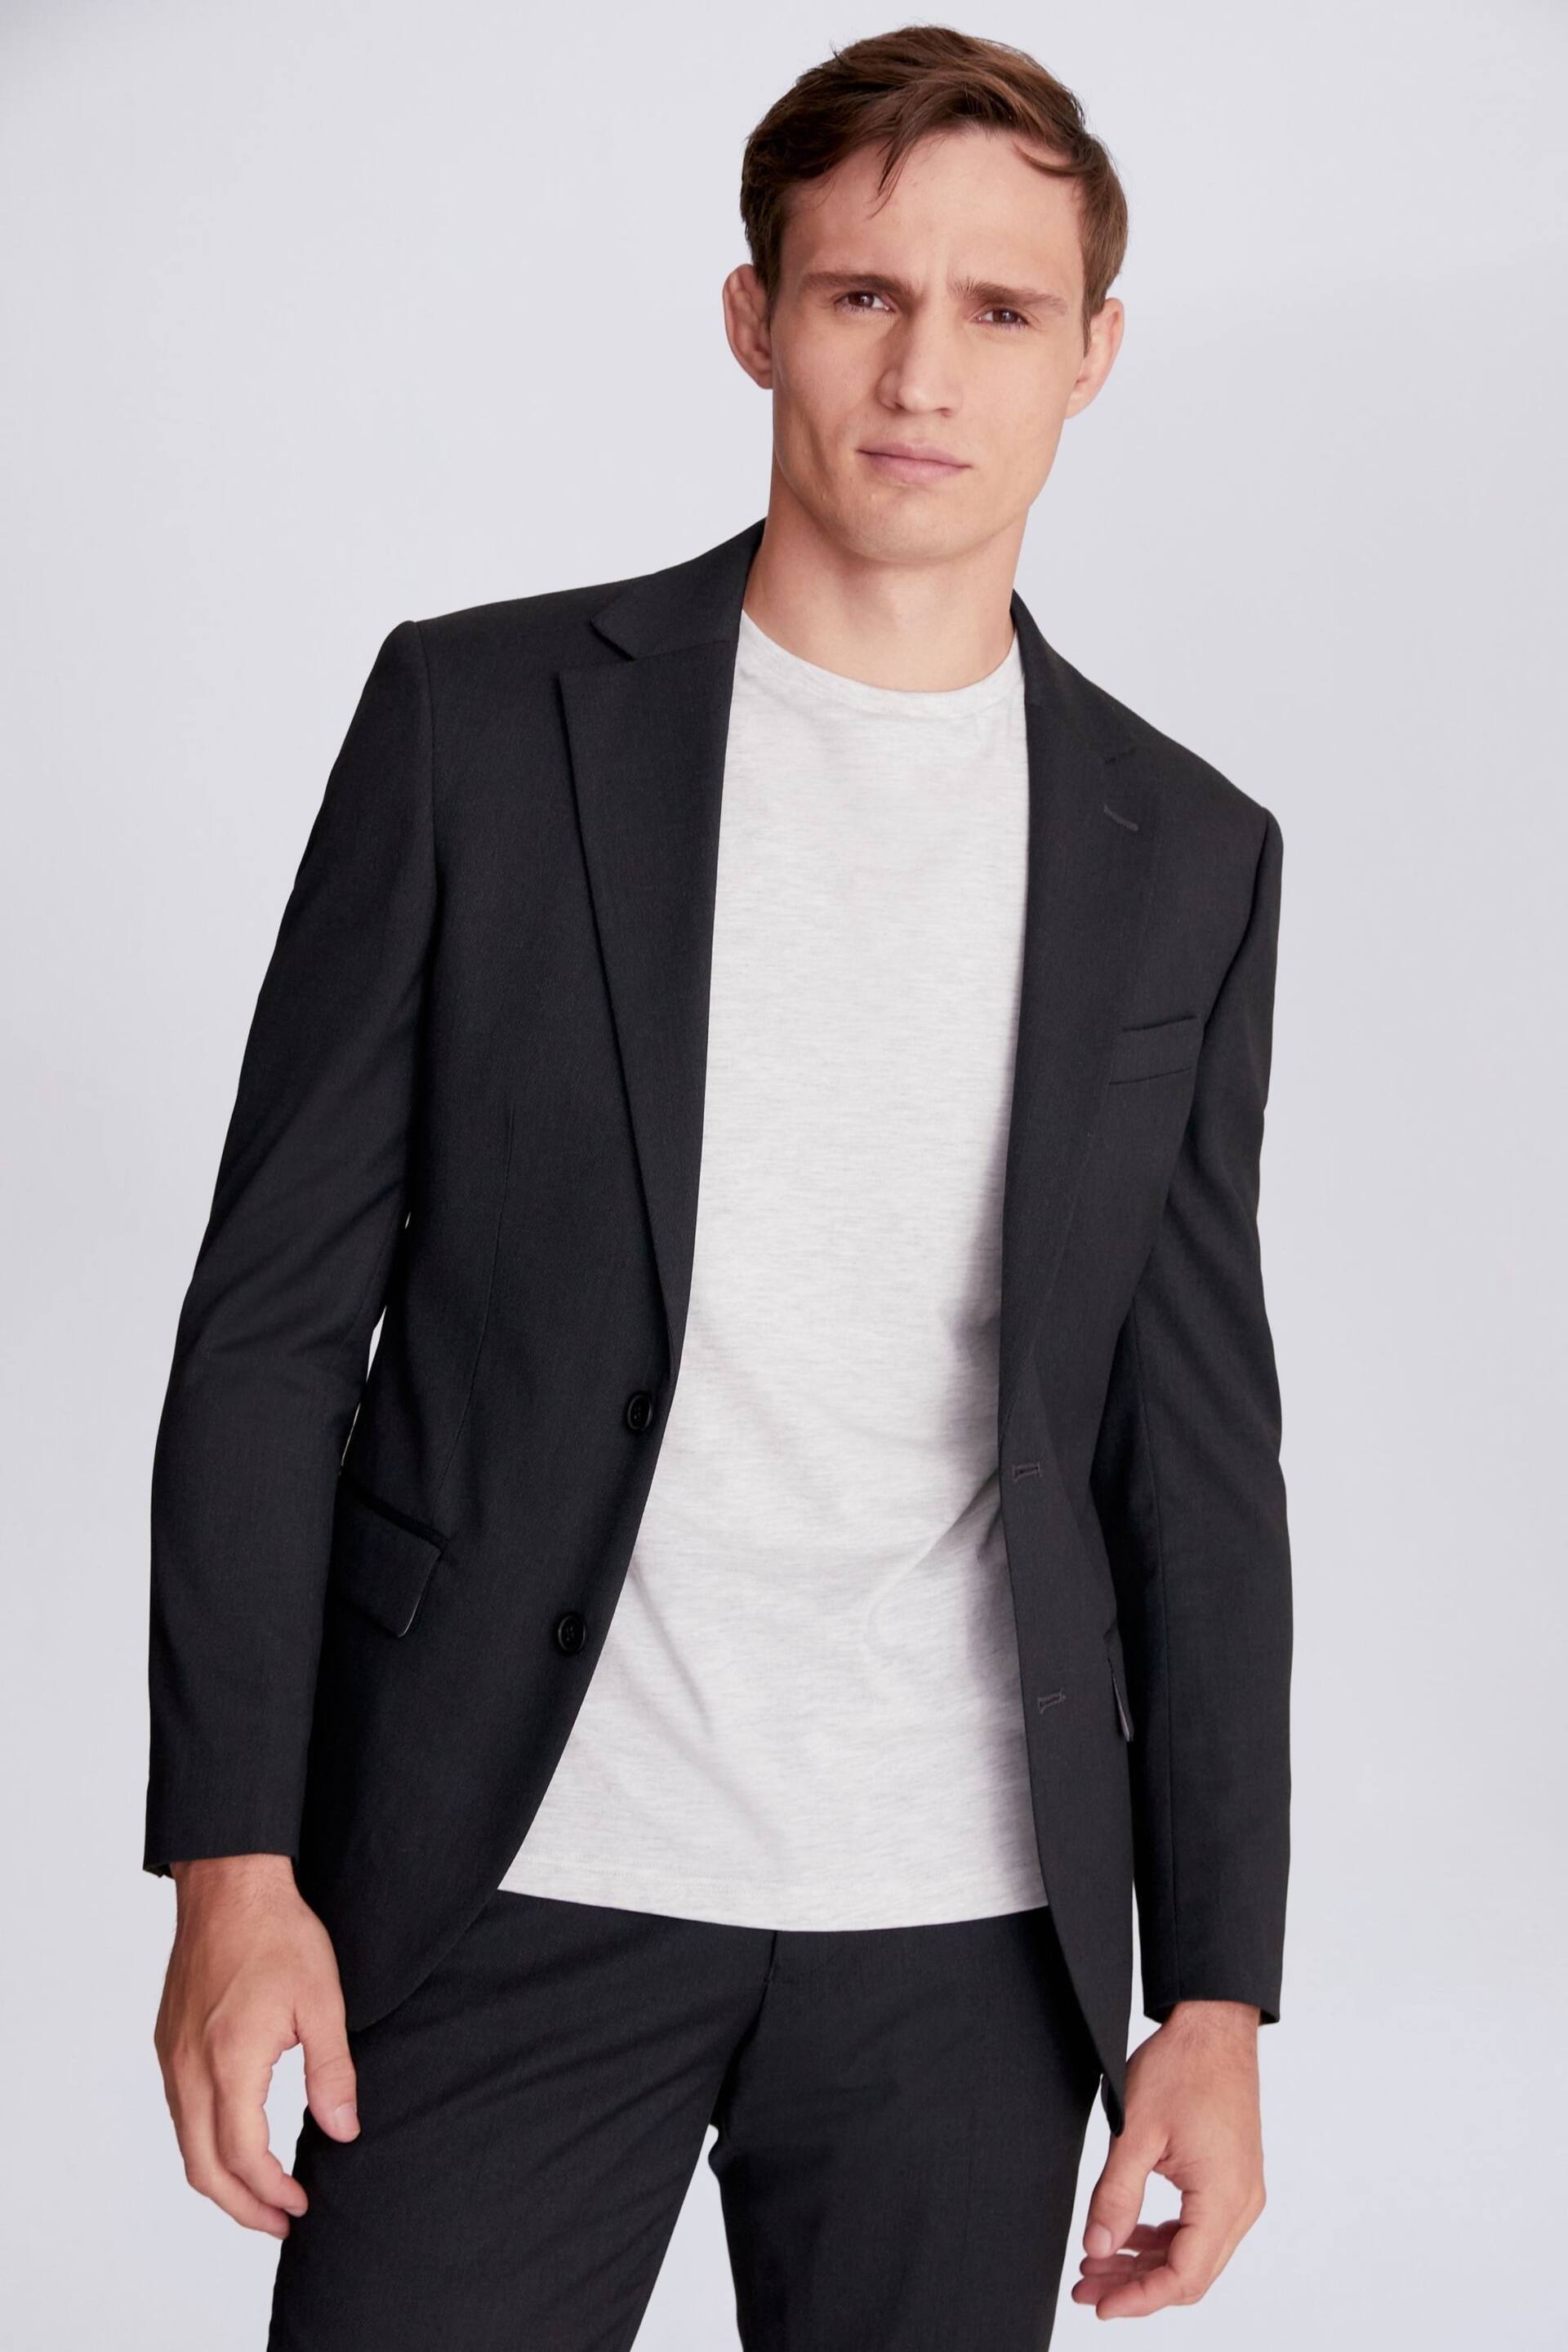 MOSS Charcoal Grey Tailored Stretch Suit: Jacket - Image 6 of 8